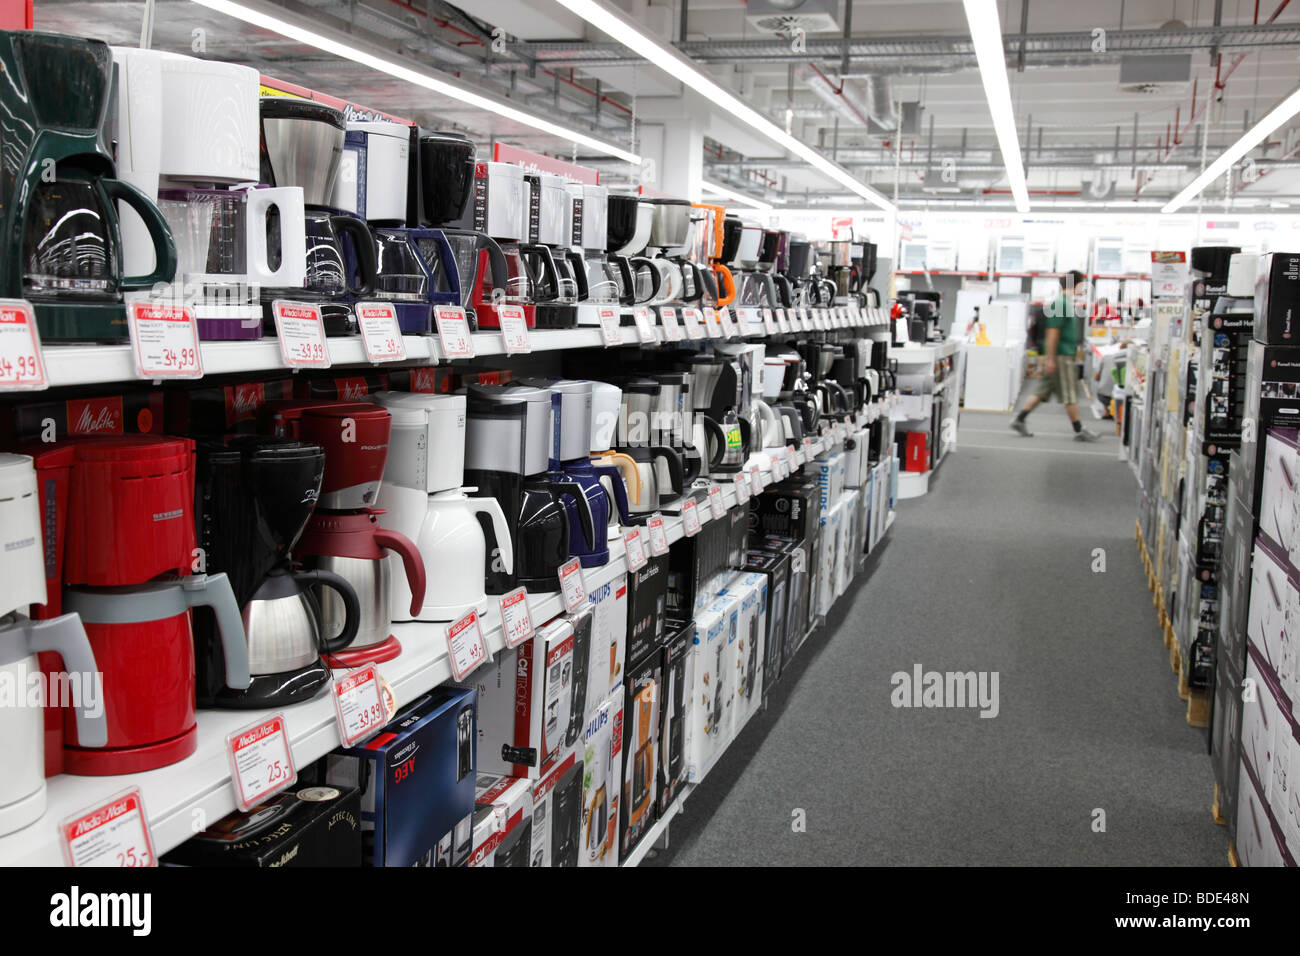 Electronic store photography and images - Alamy